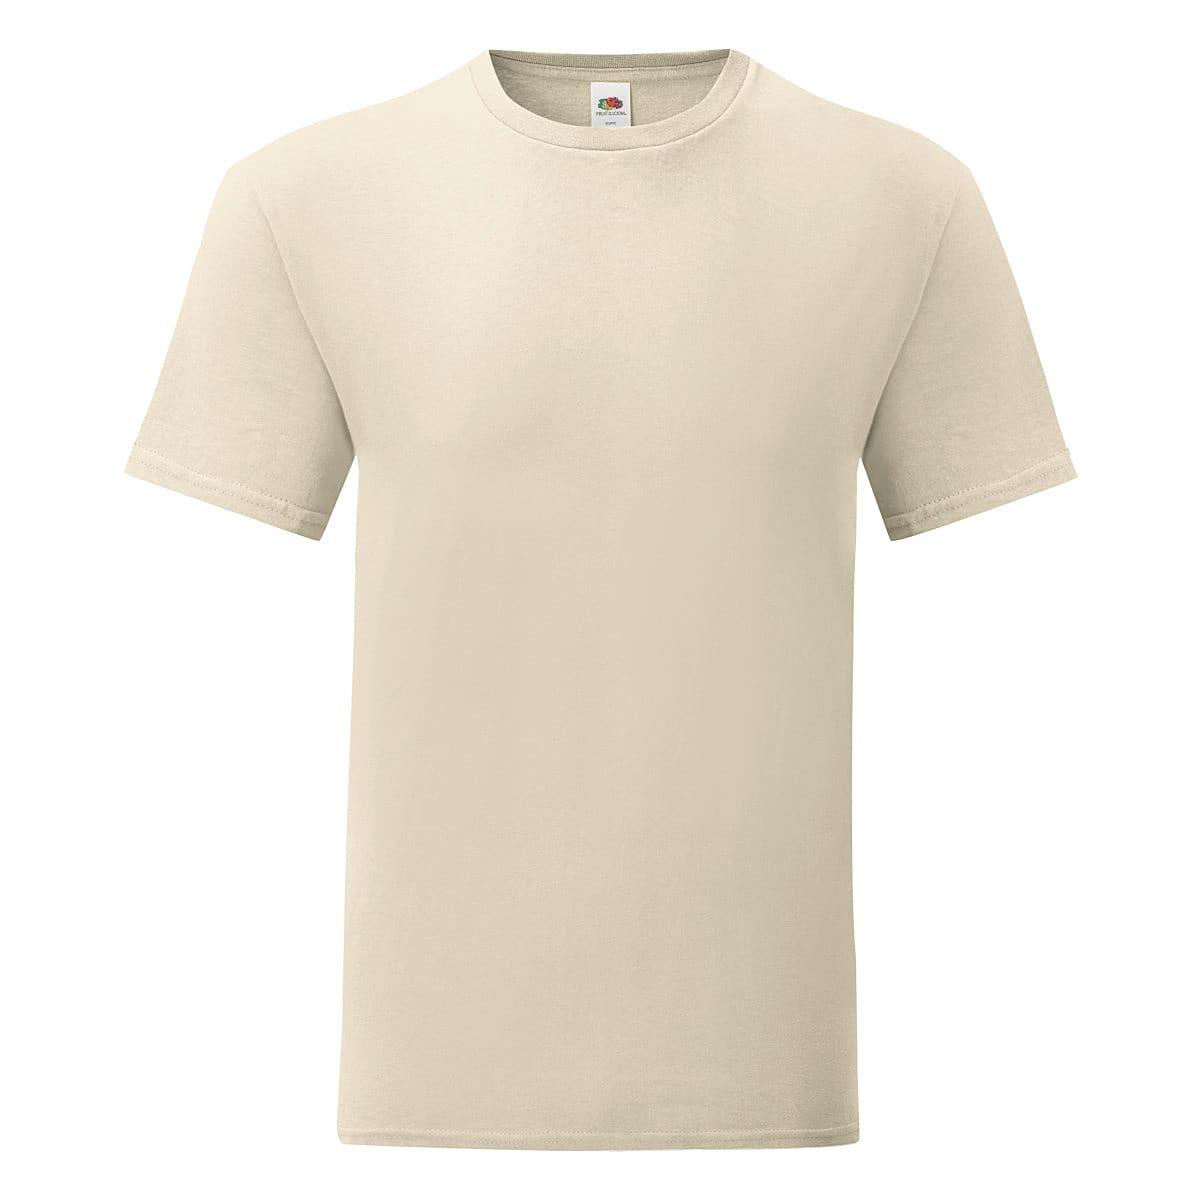 Fruit Of The Loom Mens Iconic T-Shirt in Natural (Product Code: 61430)